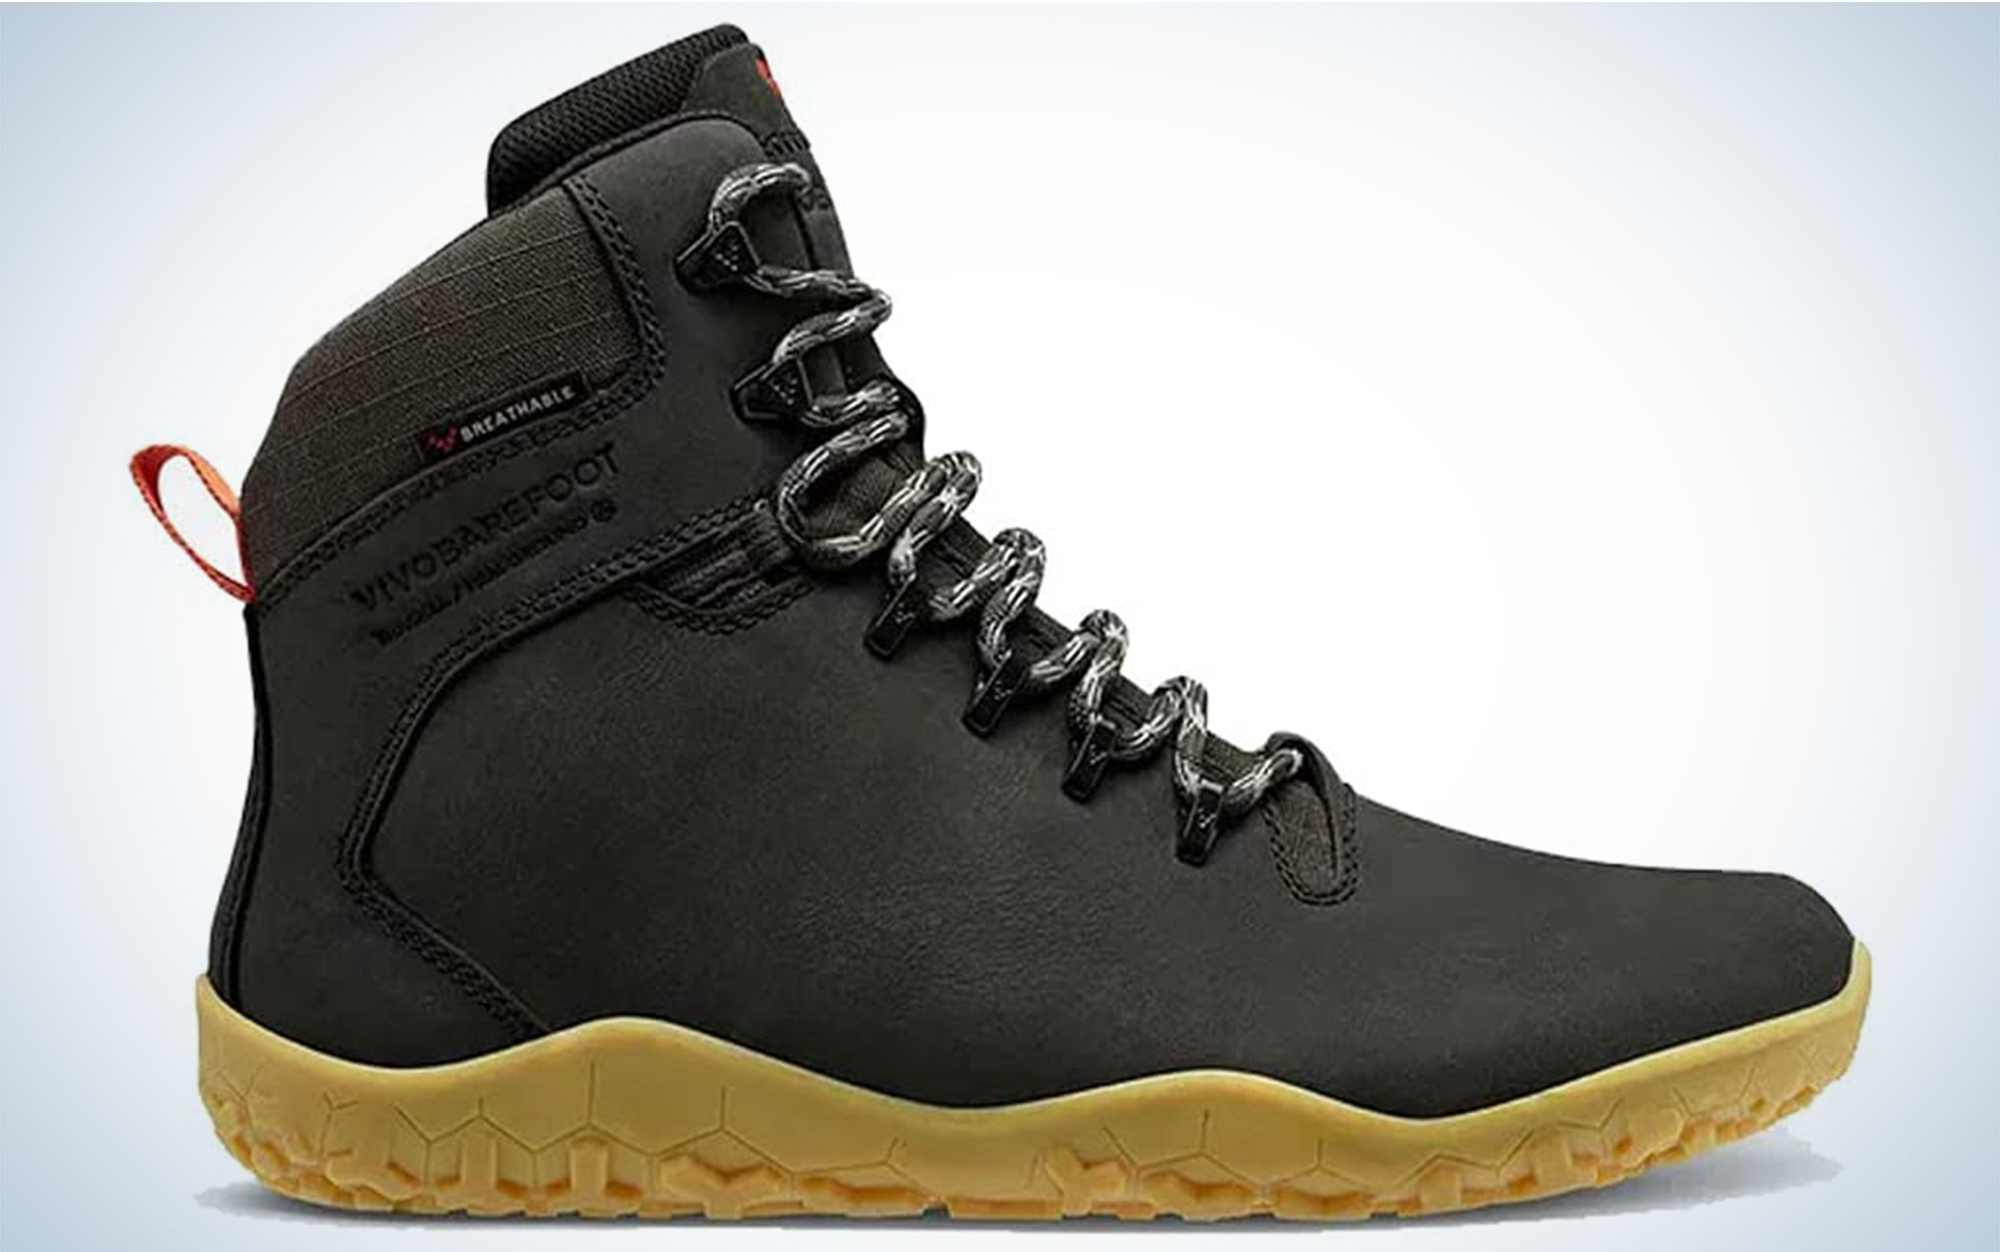 The Vivobarefoot Tracker is the best minimalist hiking boot for shoulder season.